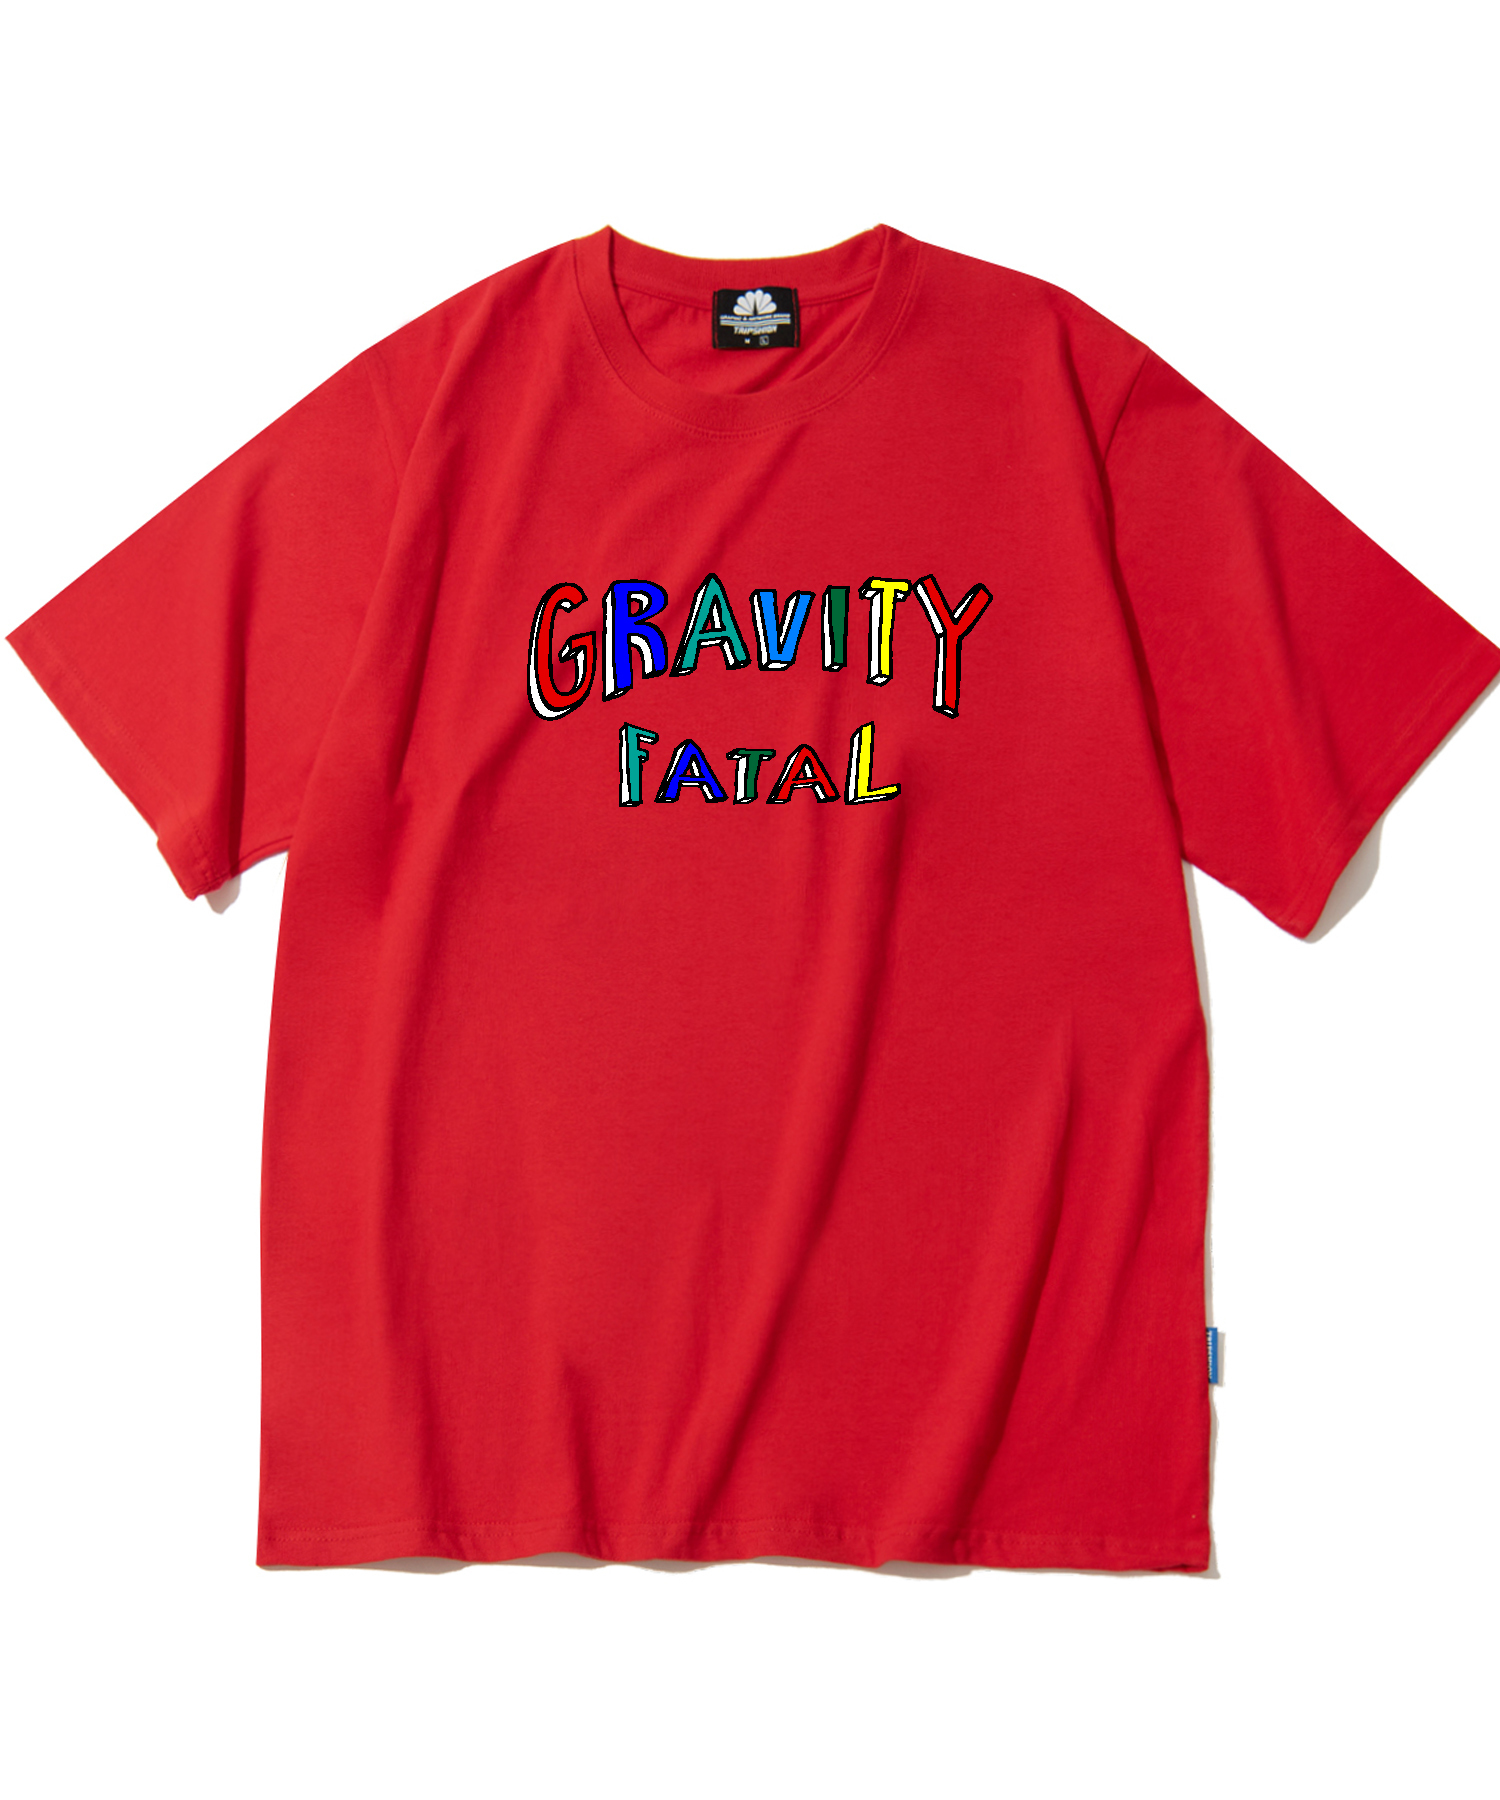 GRAVITY FATAL T-SHIRTS - RED